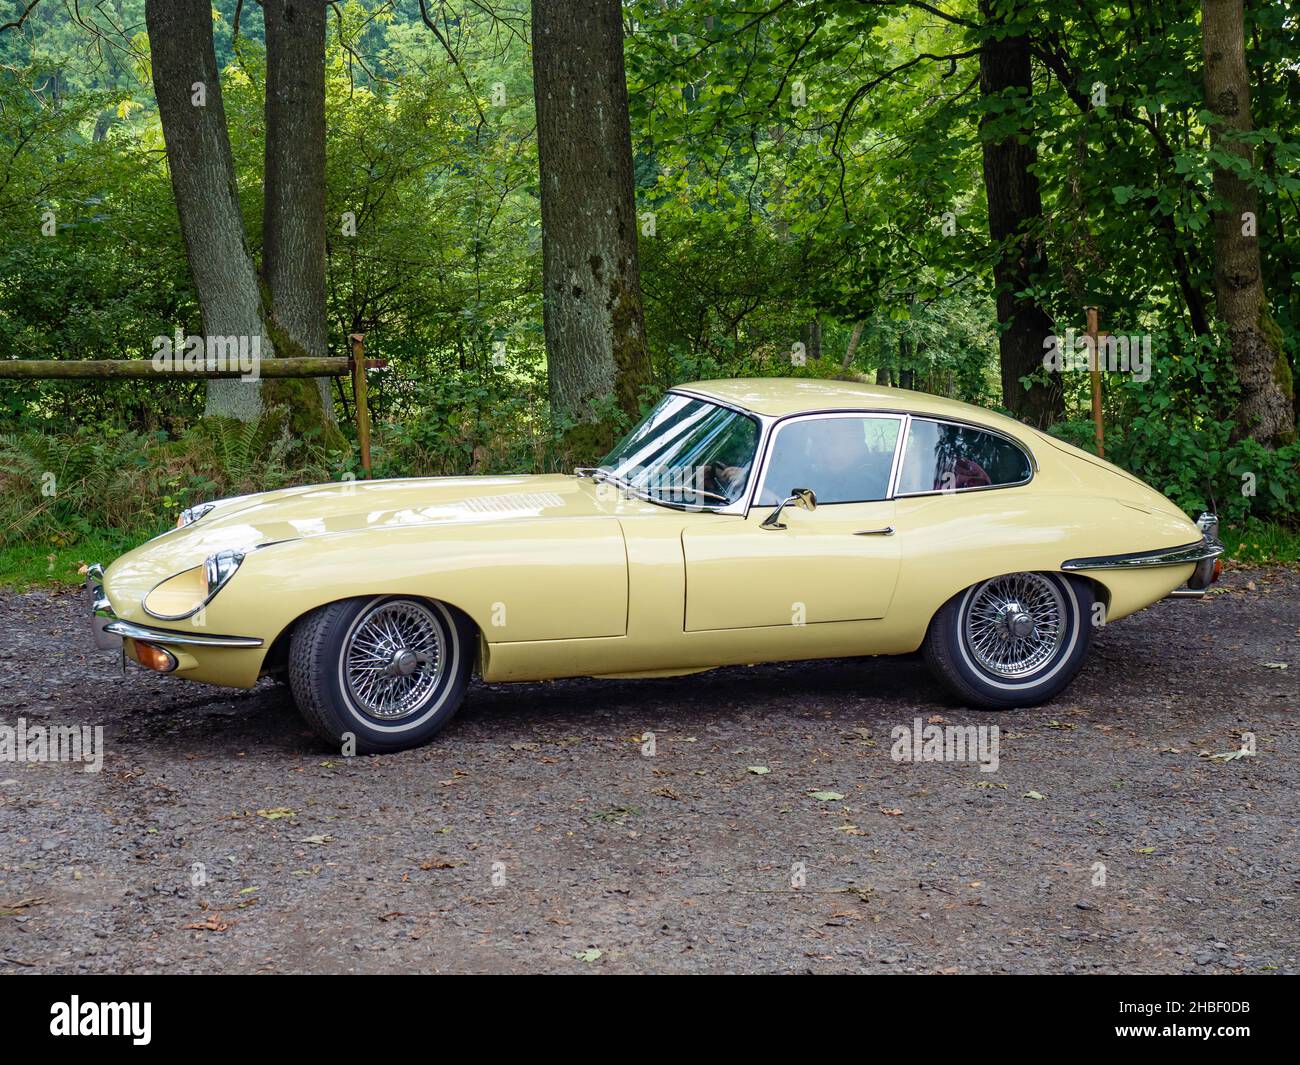 Studenec, Czechia. 25th of September 2021. British classic vehicle Jaguar E-Type, amazing vintage car riding in forest path Stock Photo